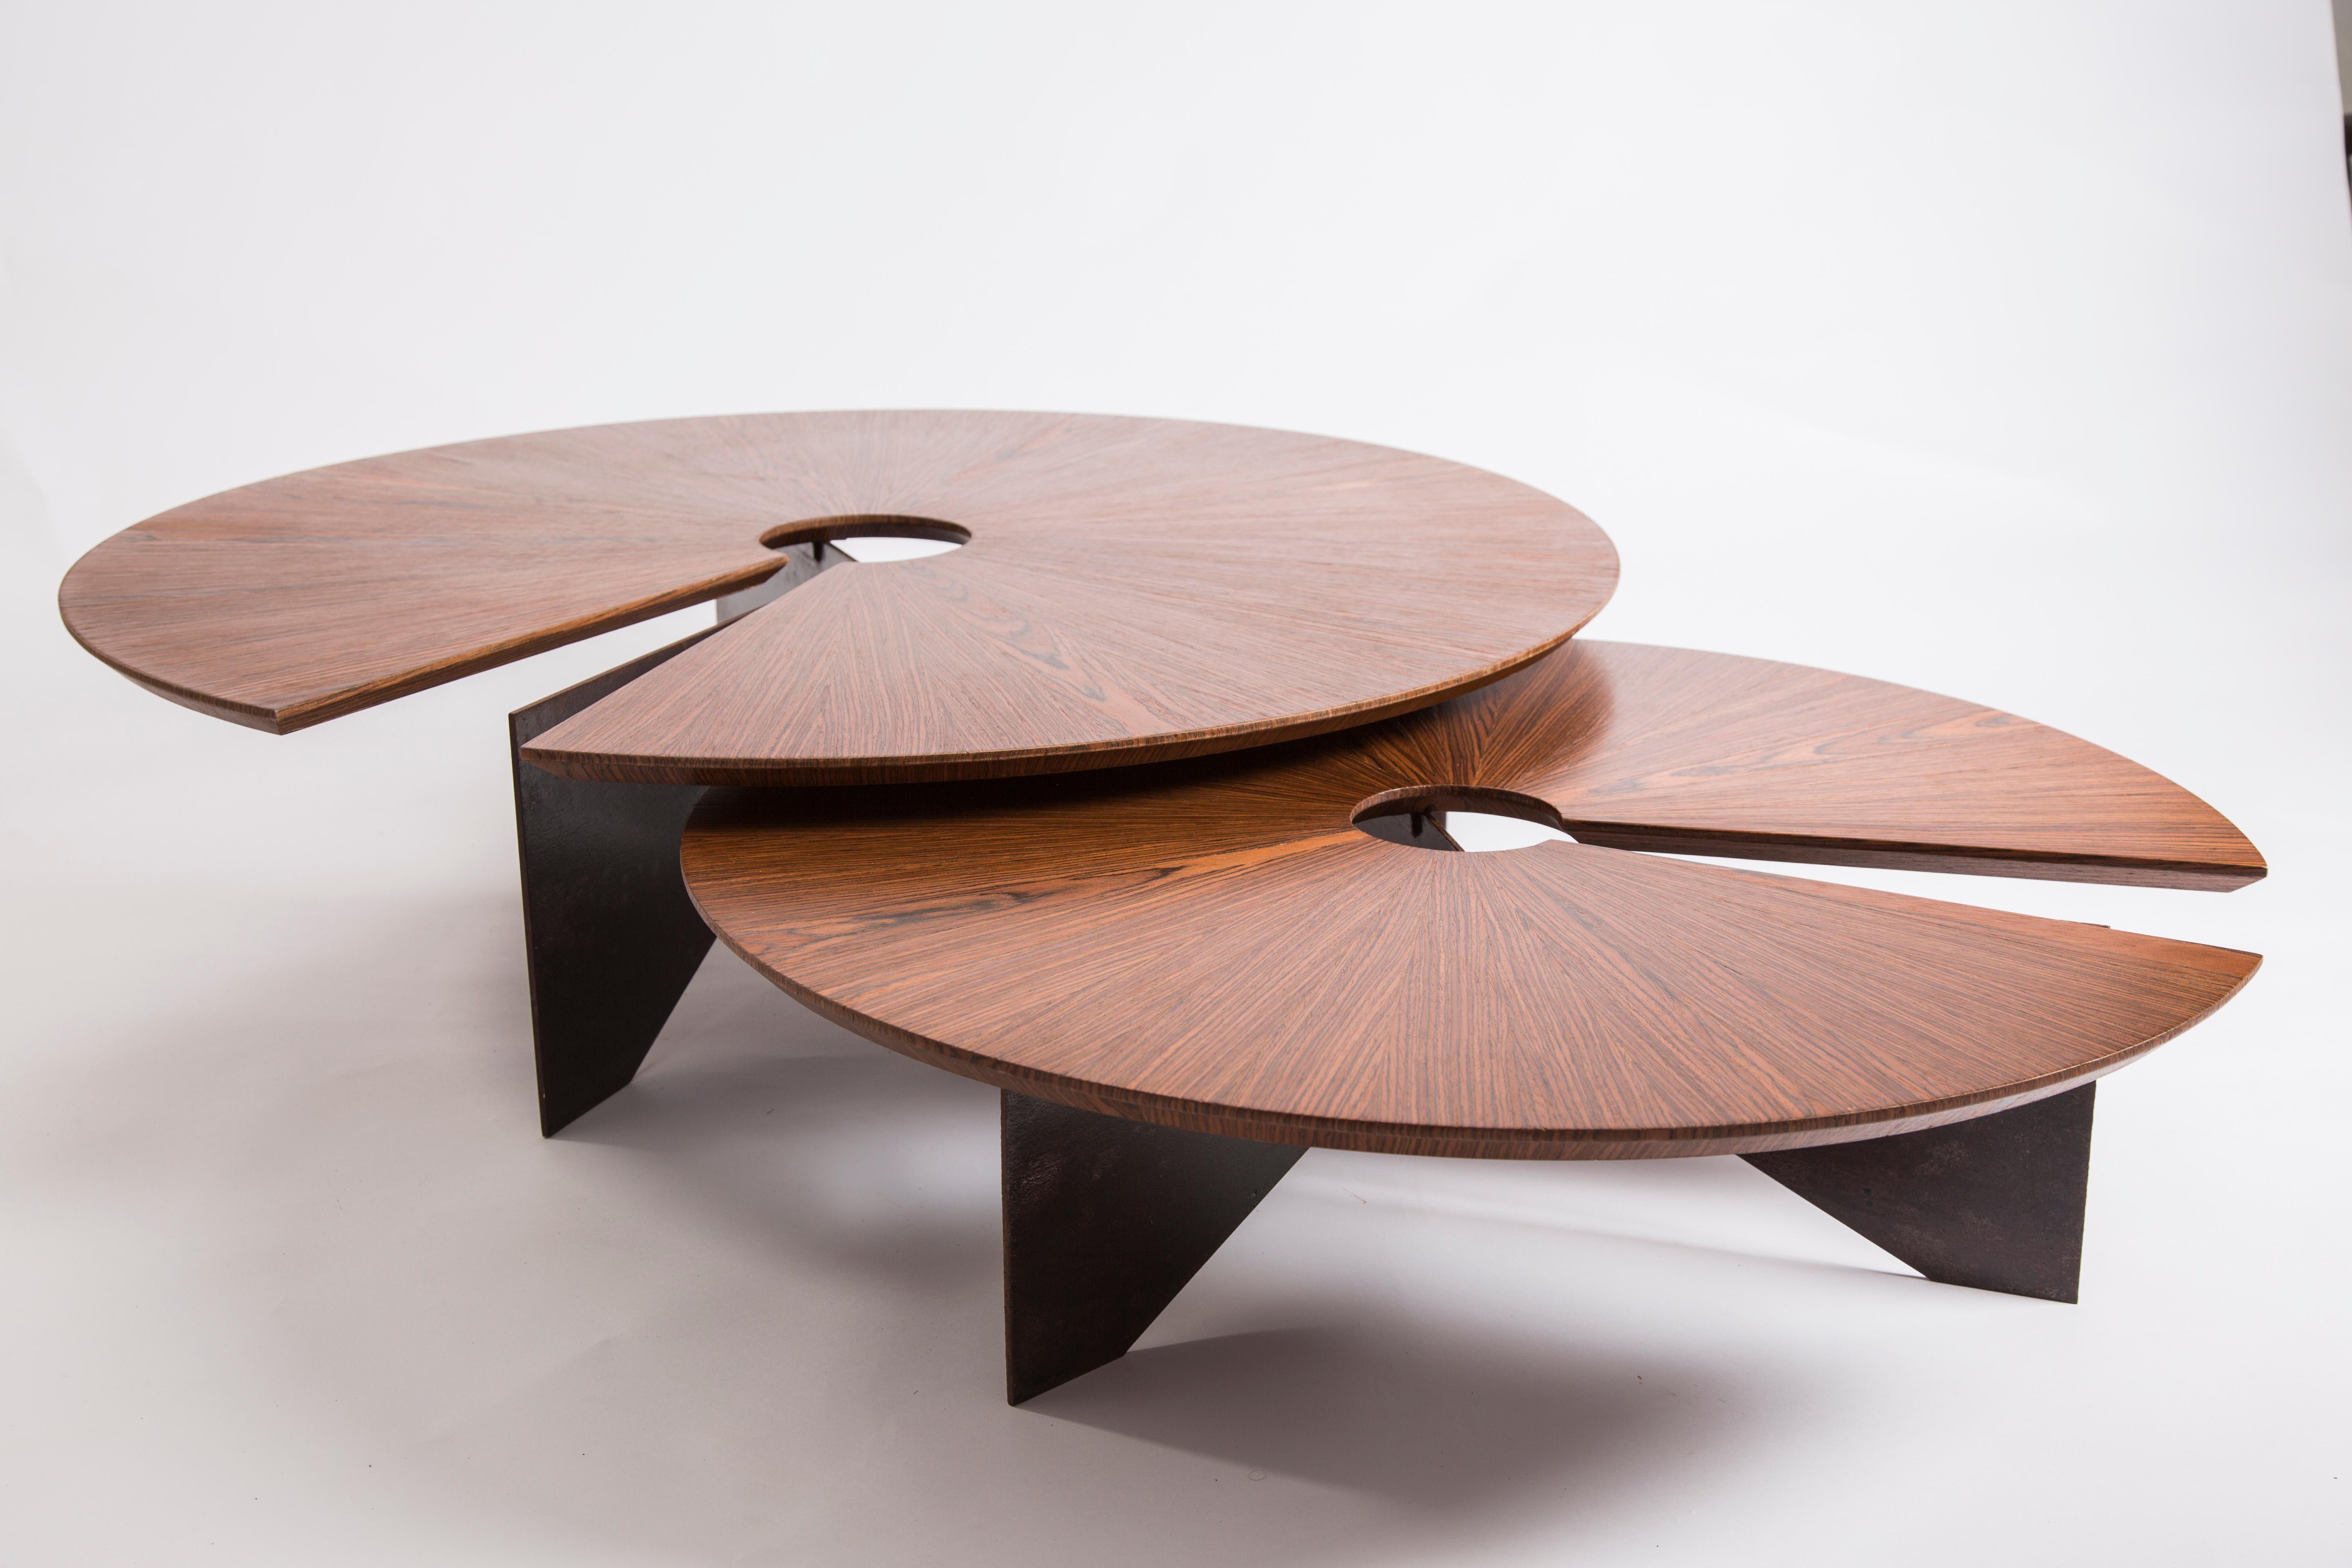 The first piece developed by the designer, this Minimalist, and modern coffee table receives the name Lena in honor of the nickname of his mother, Helena. It disrupts the observer, as it has its top balanced between only two of its three feet, which